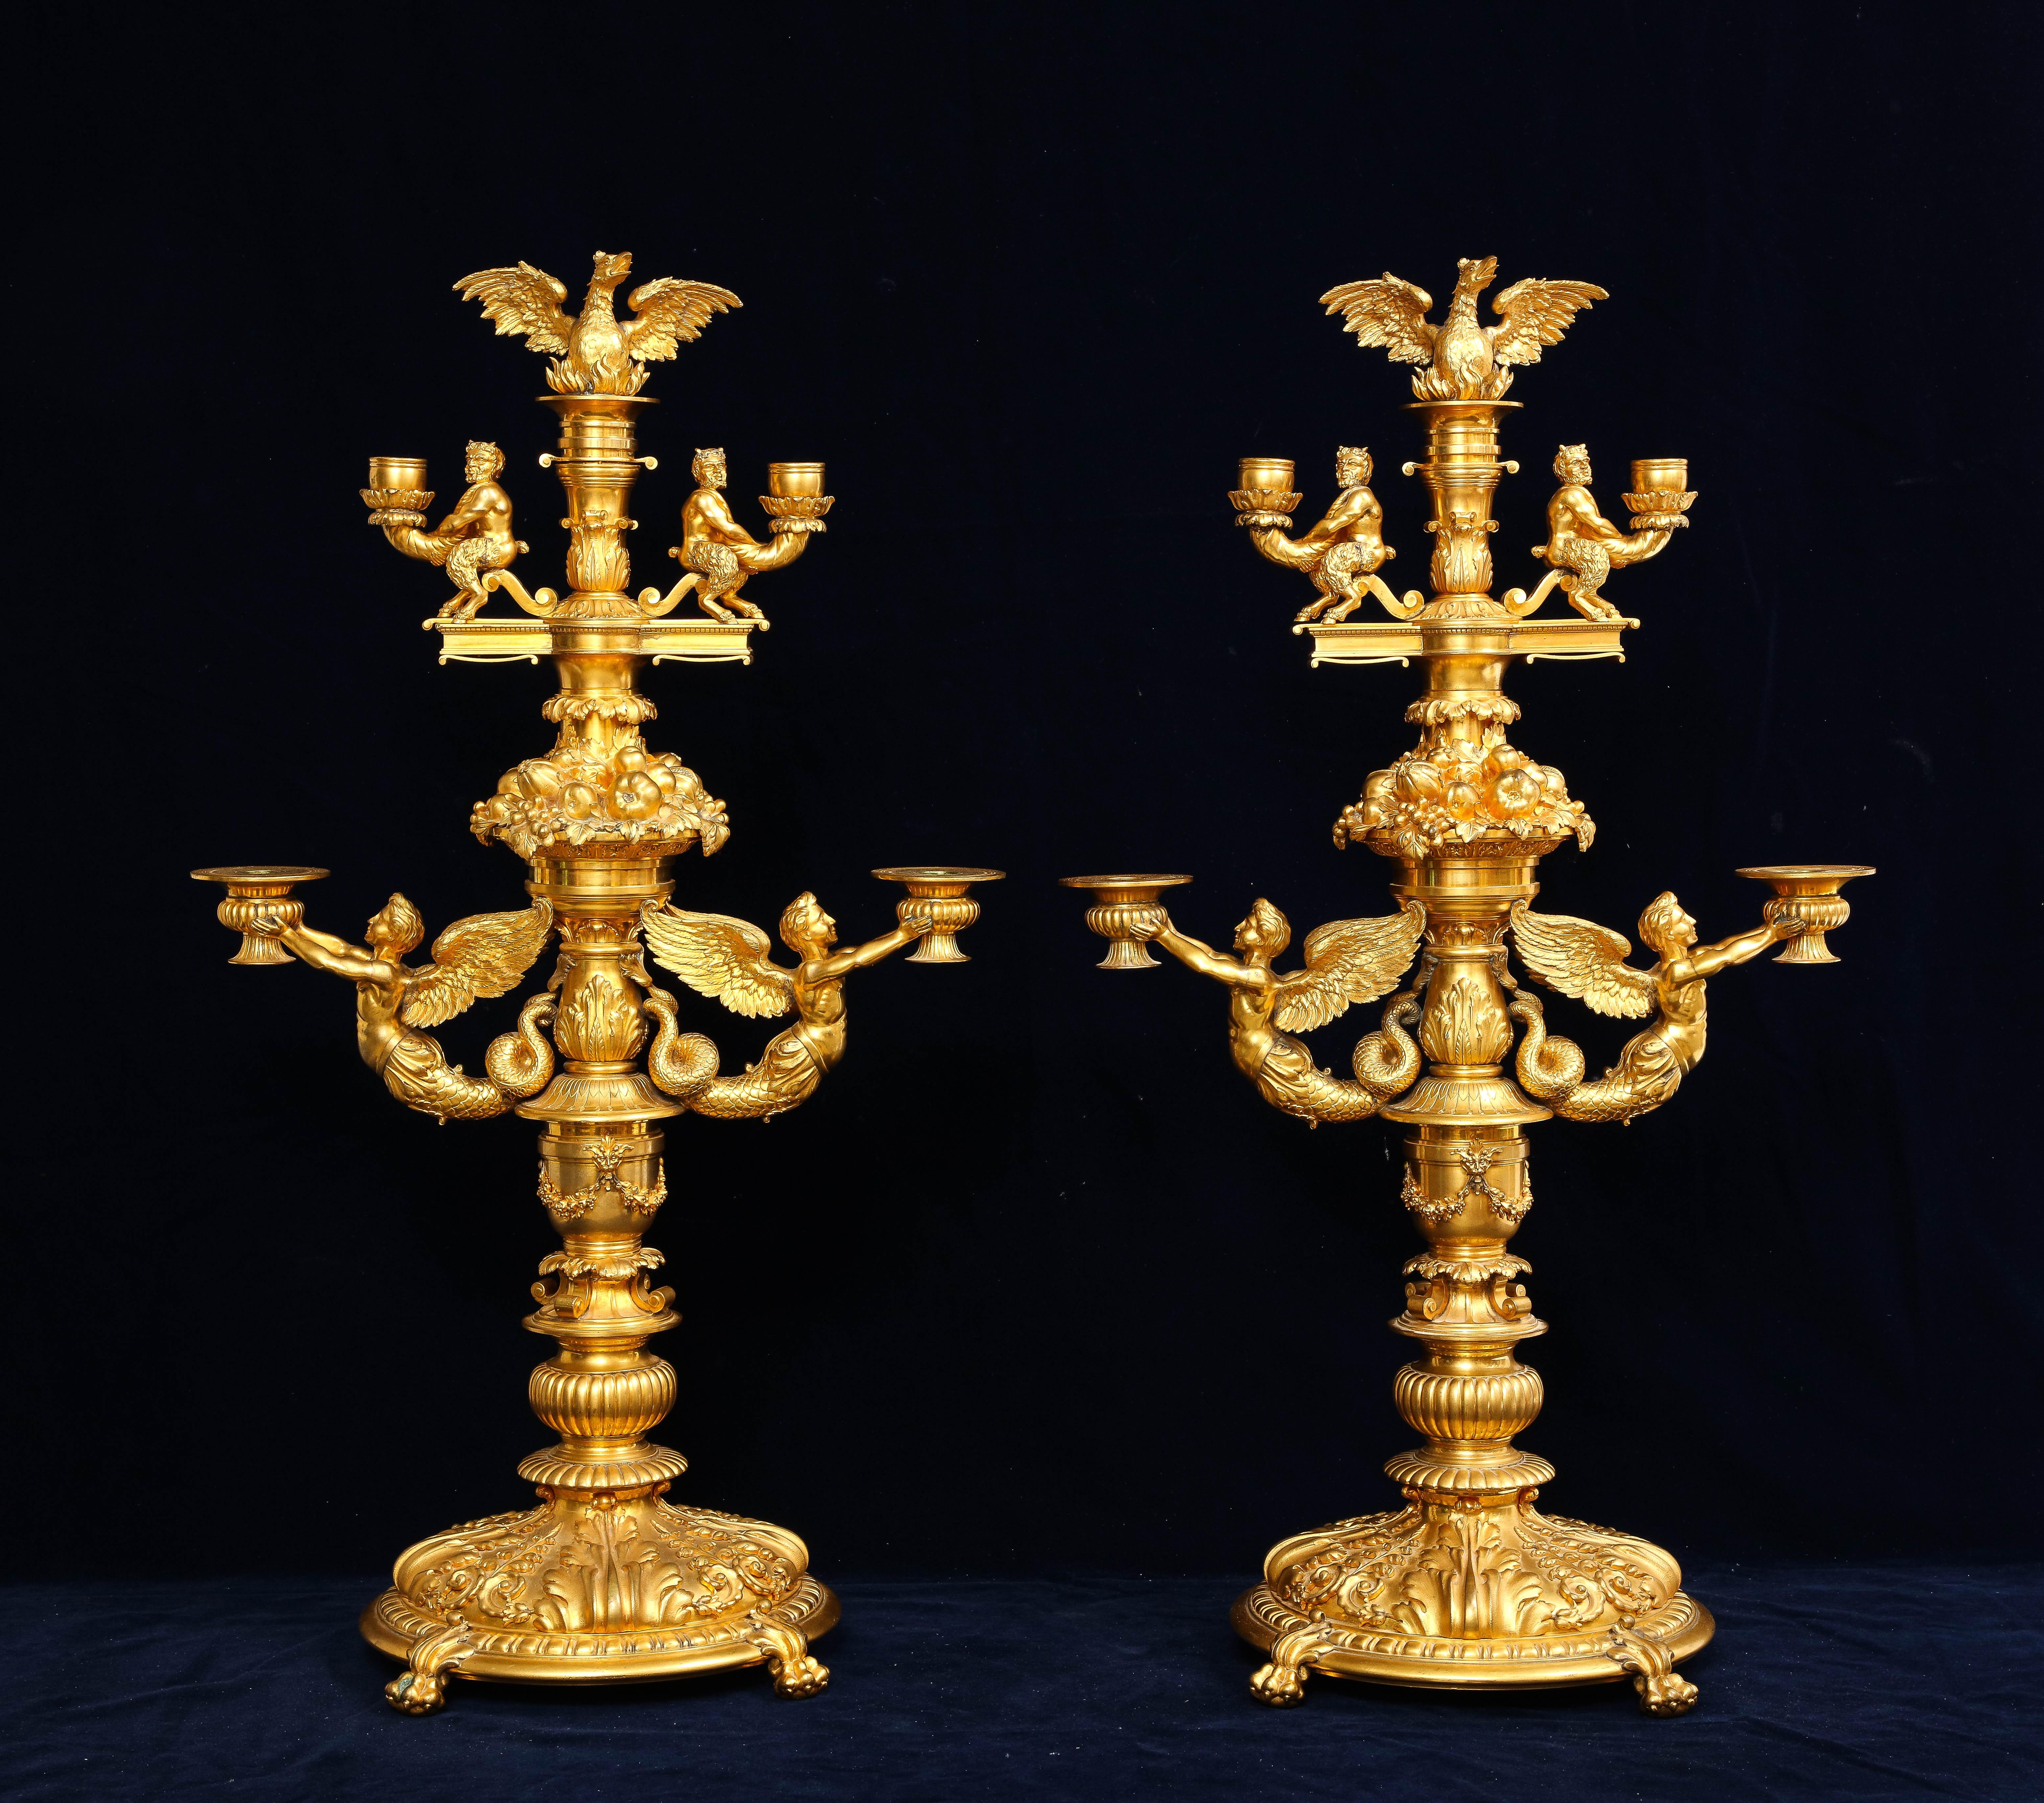 Marvelous Pair of 19th C. French Ormolu Four Arm Candelabras, Signed P. Canaux In Good Condition For Sale In New York, NY